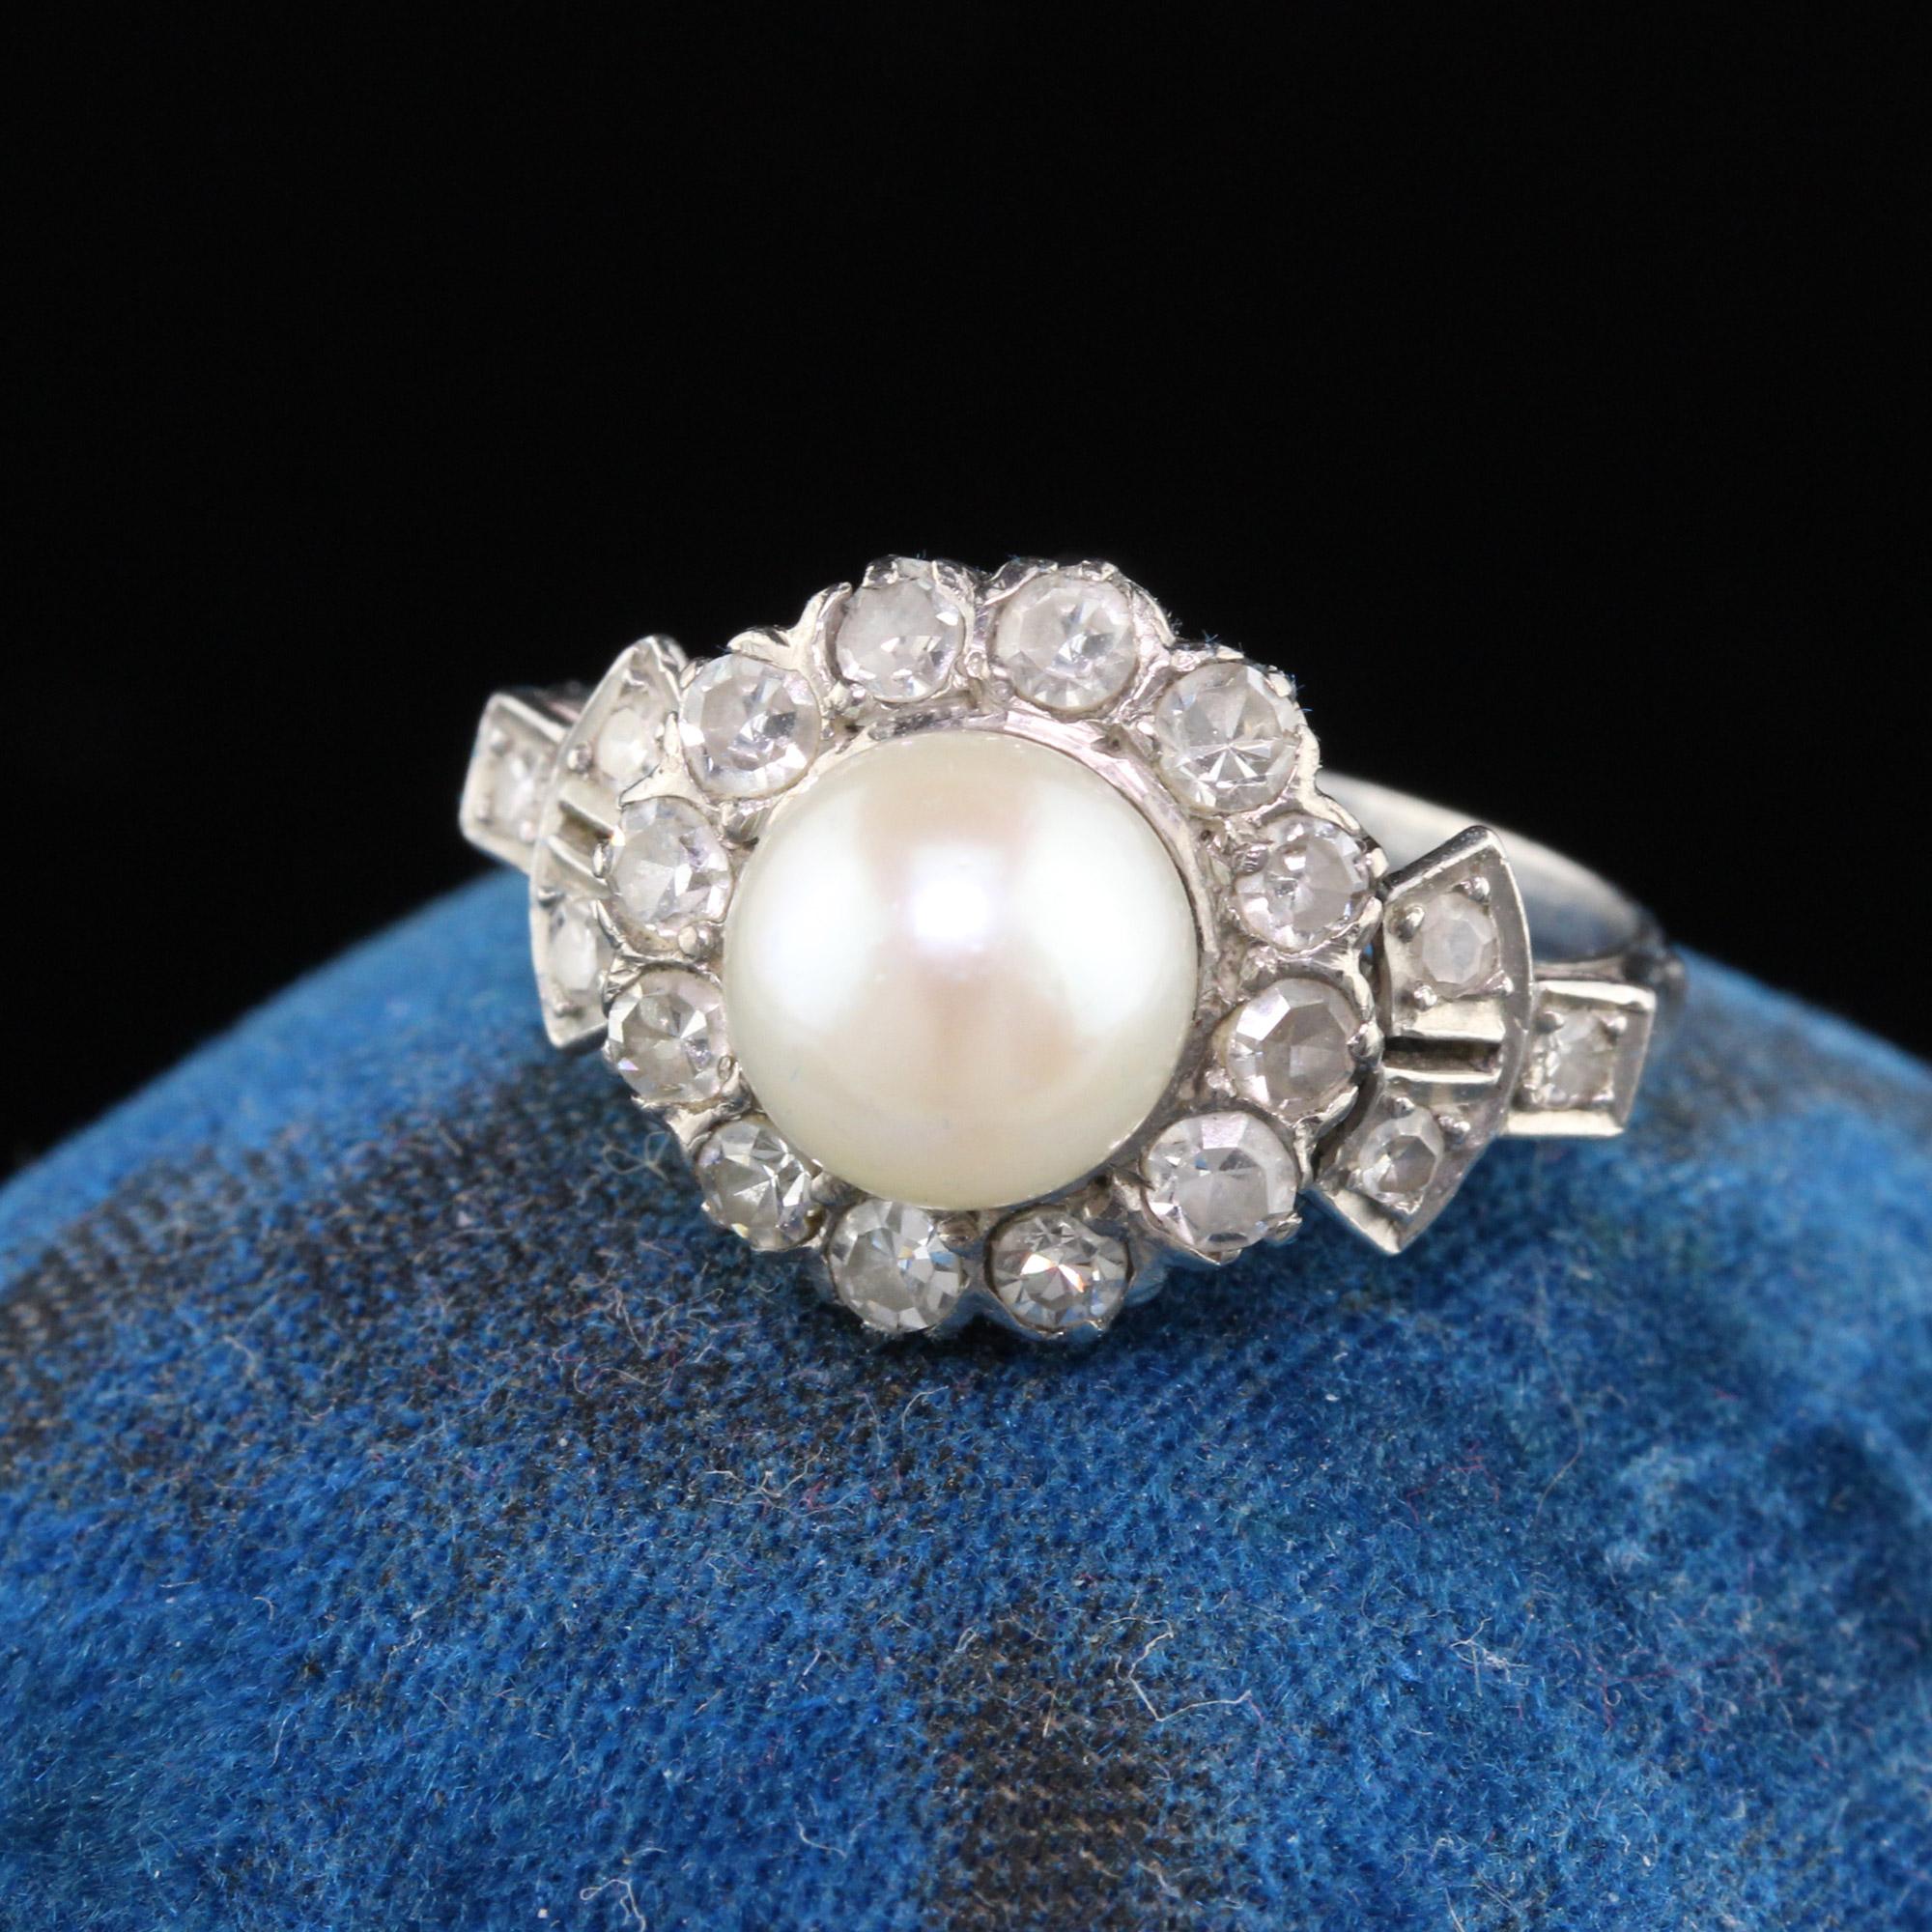 Gorgeous Edwardian White Gold & Platinum Engagement ring featuring a pearl in the center surrounded by a halo of lively single cut diamonds.

#R0235

Metal: 18K White Gold & Platinum

Weight: 4.3 Grams

Pearl: Measures approximately 7.2 mm in